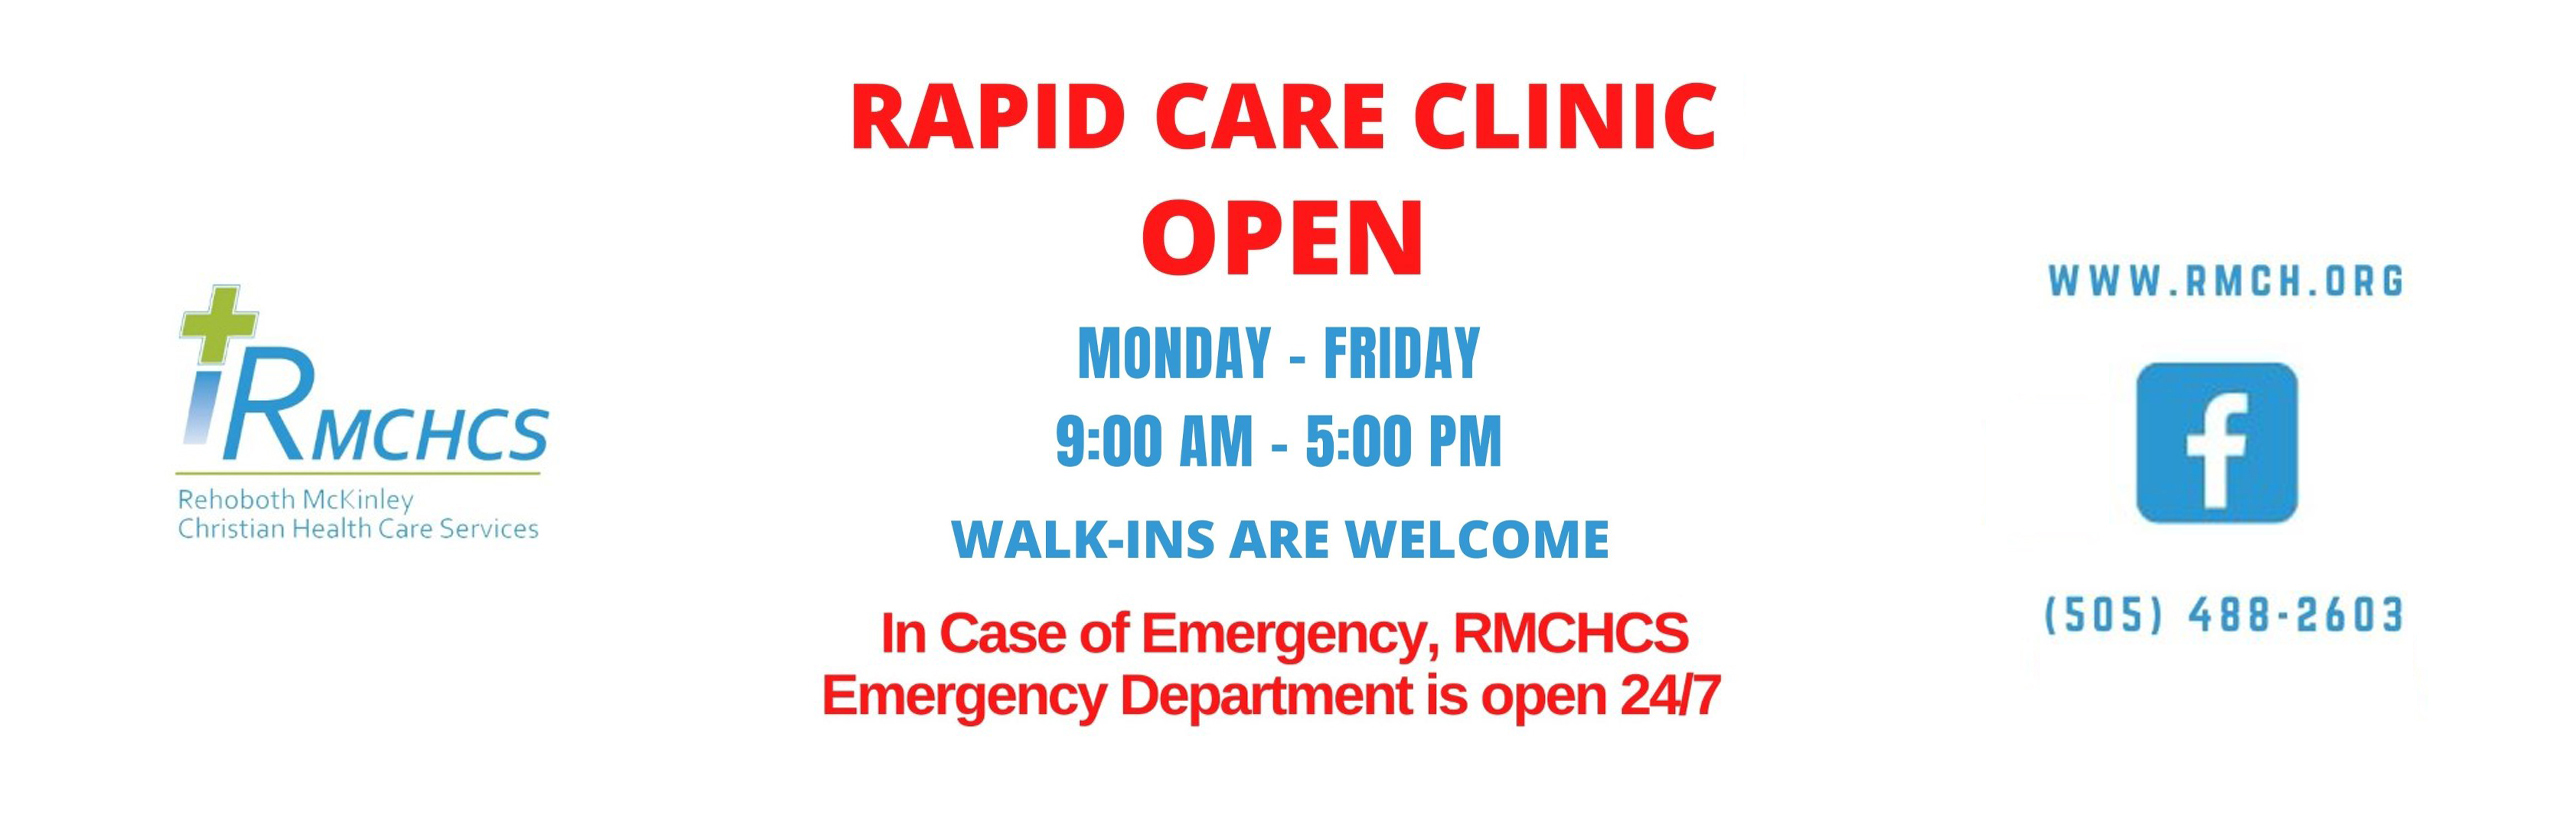 Rapid care clinic hours!mon-friday 9am-5pm